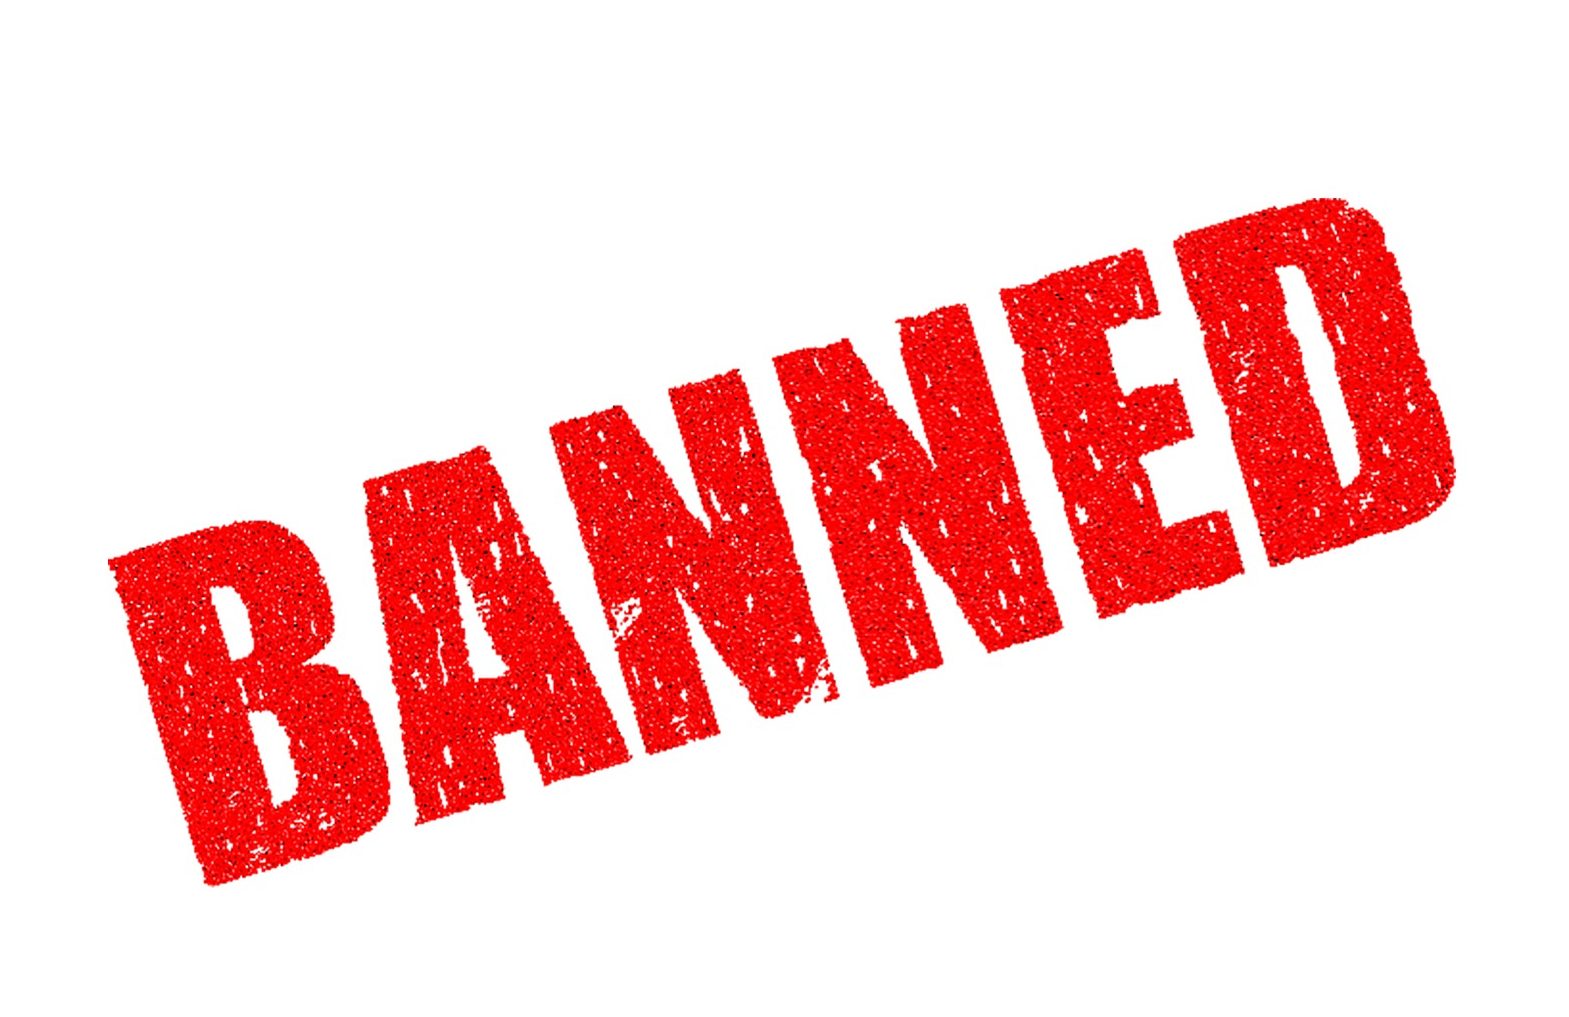 NEWS | Farmer banned from keeping livestock for ten years